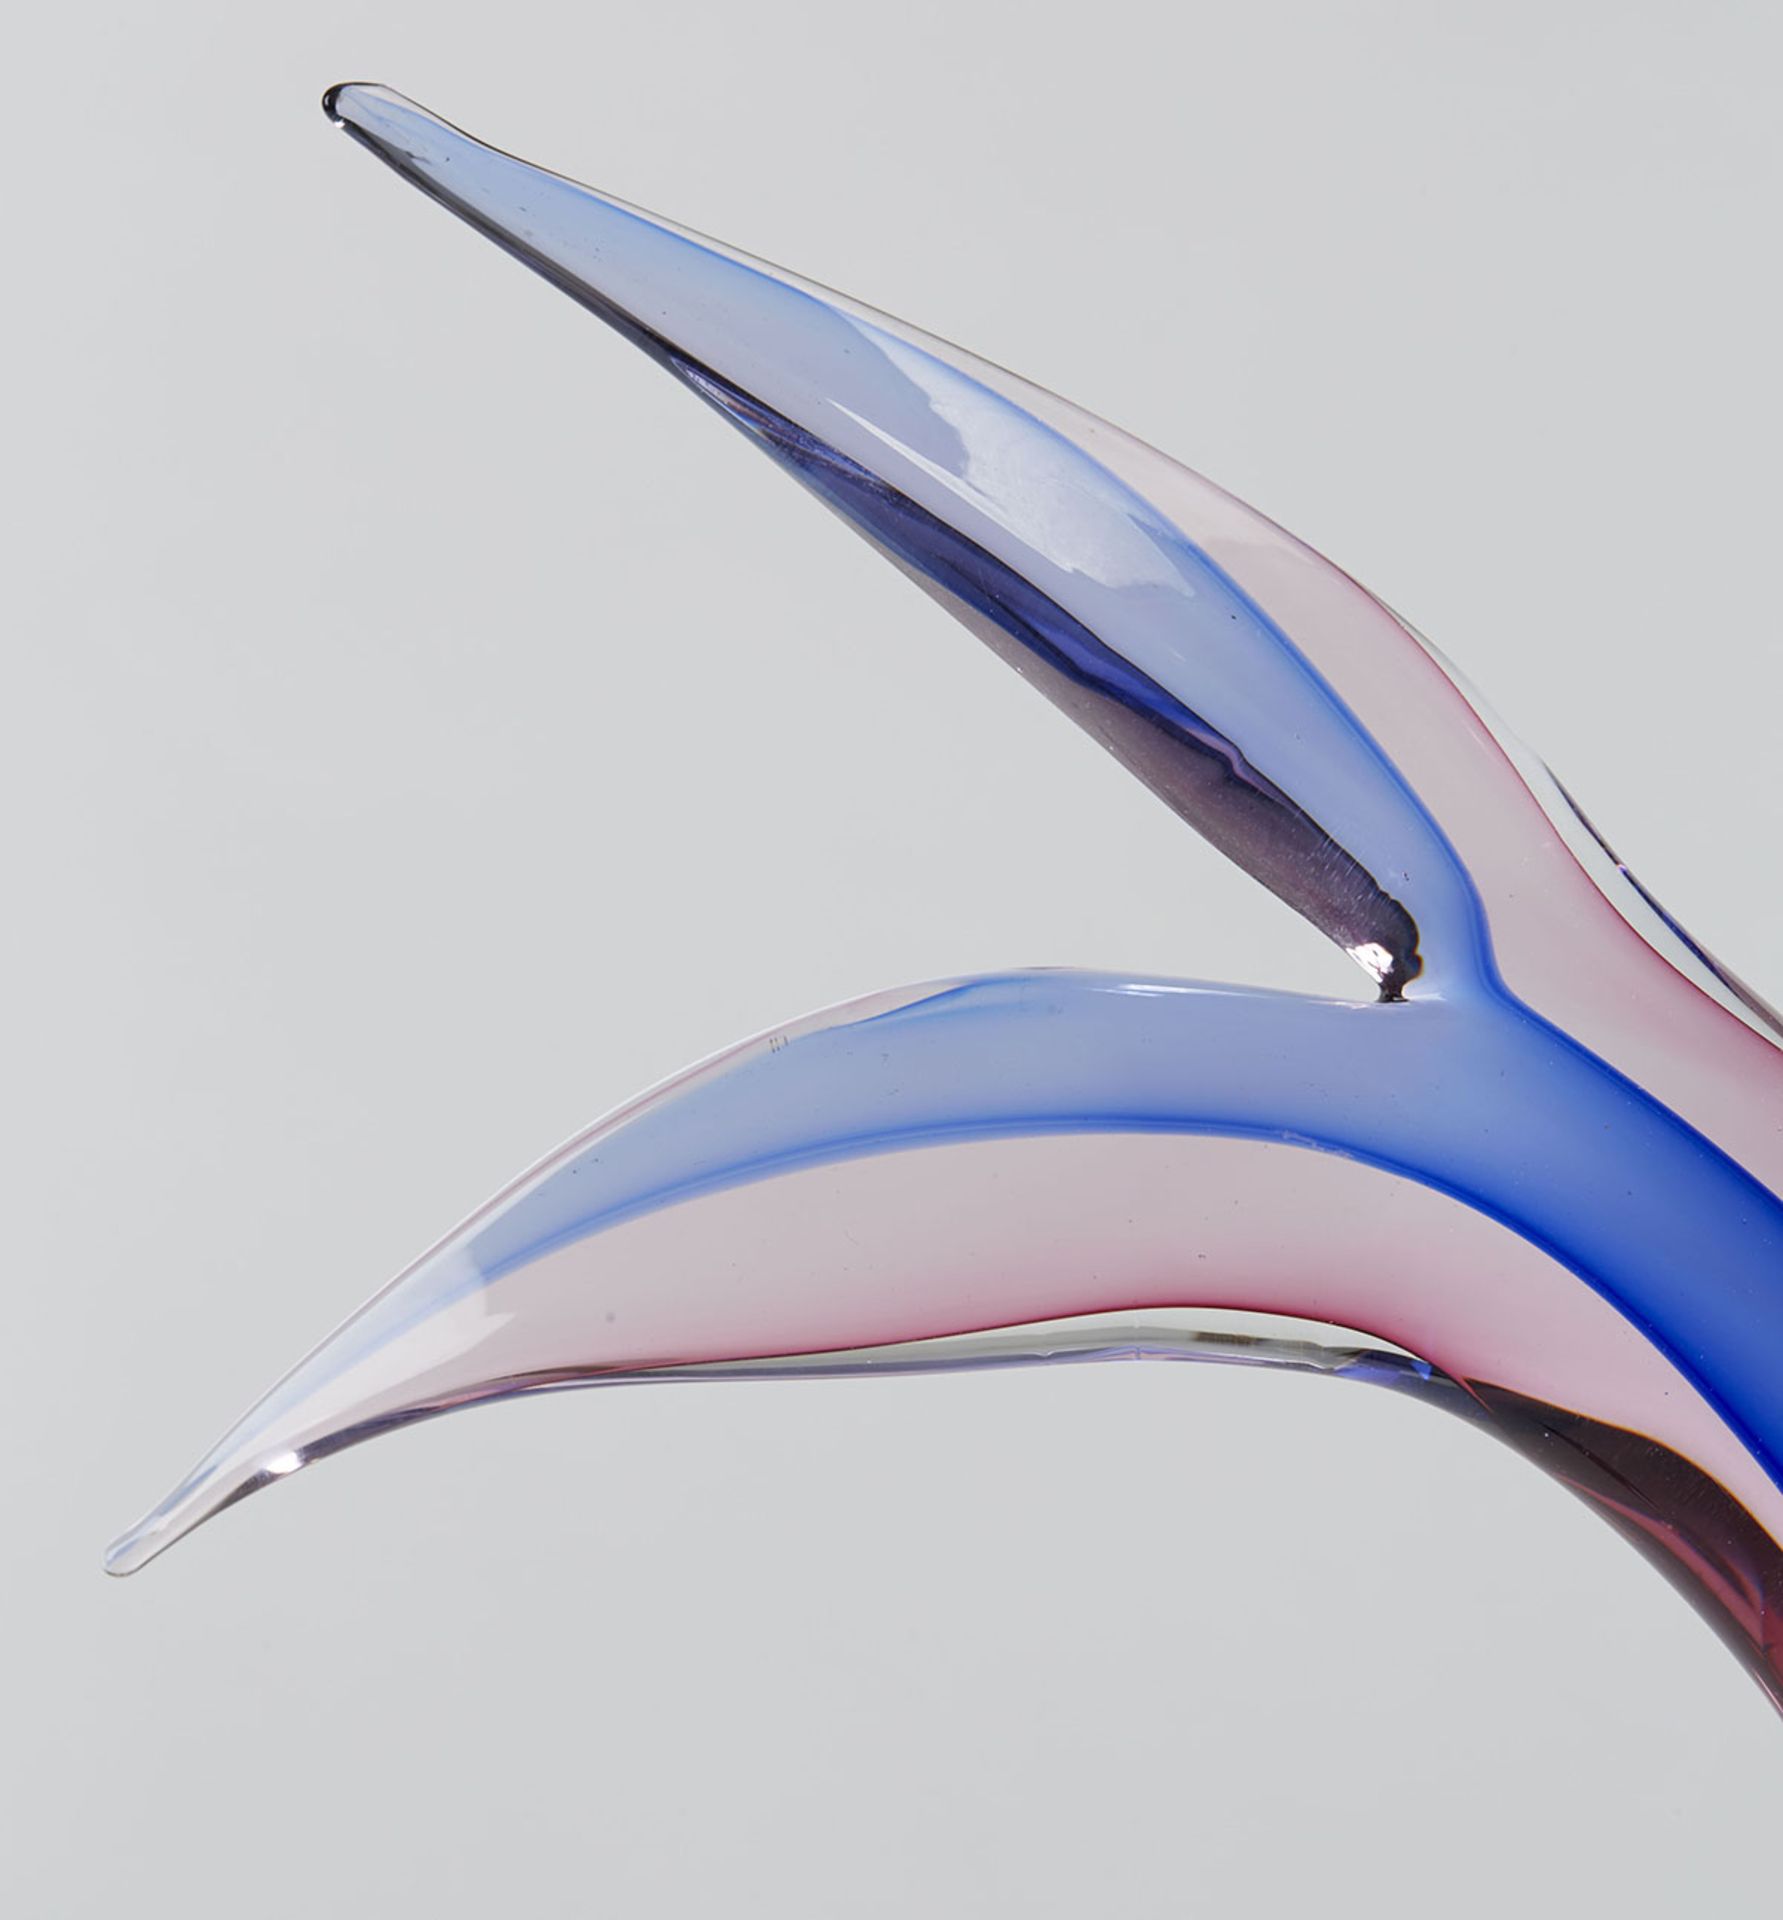 Italian Murano Sommerso Art Glass Leaping Marlin Fish Sculpture - Image 3 of 9